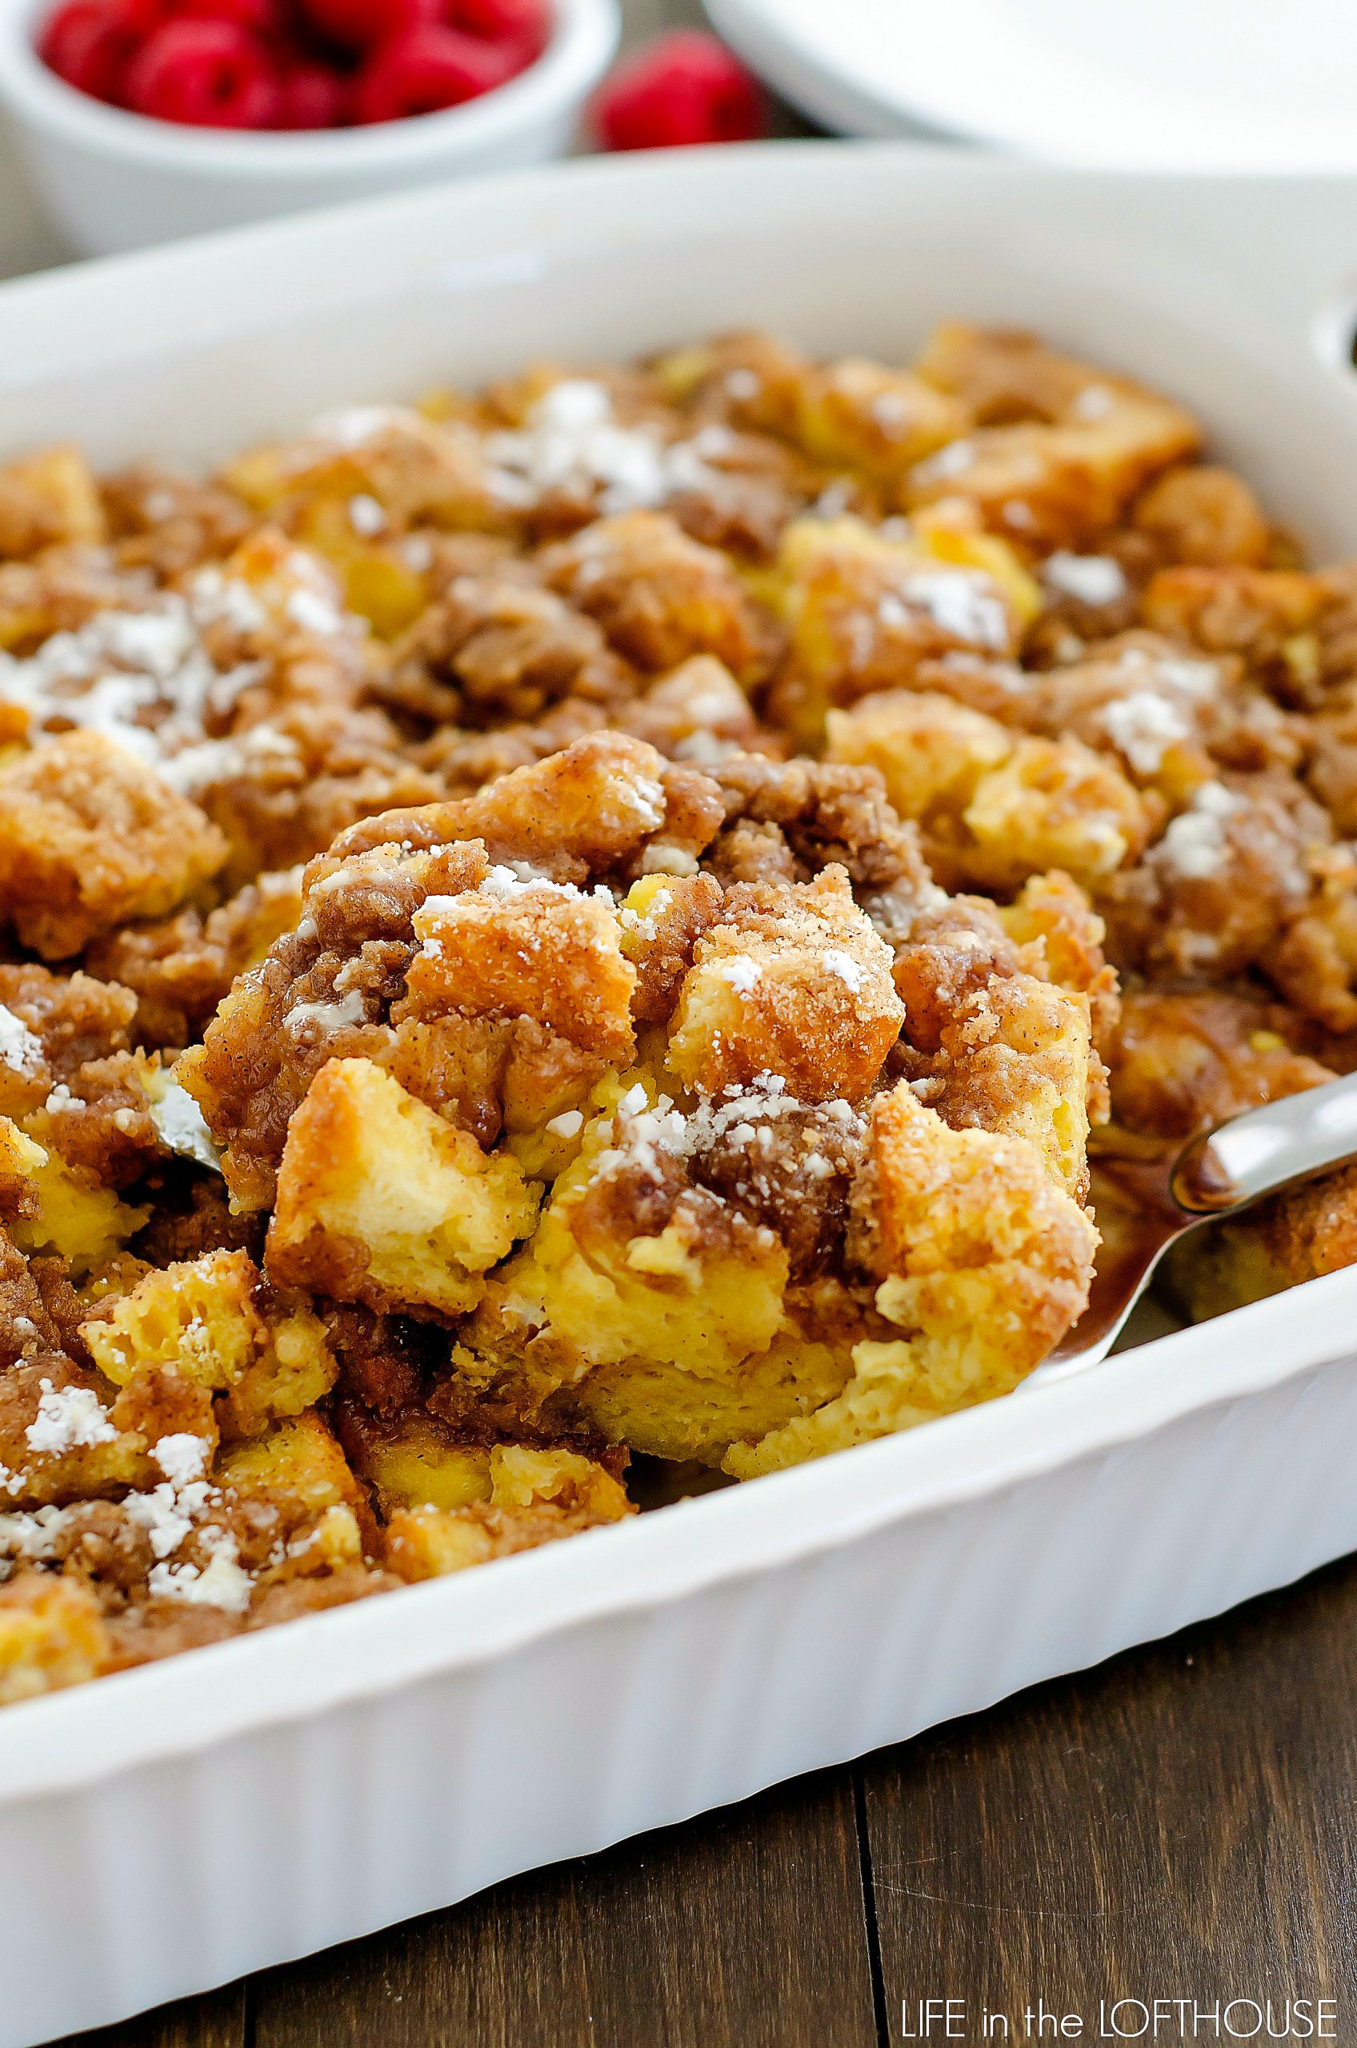 French toast bake is not your traditional french toast, it's all baked up in one casserole dish but still full of that cinnamon flavor. Life-in-the-Lofthouse.com